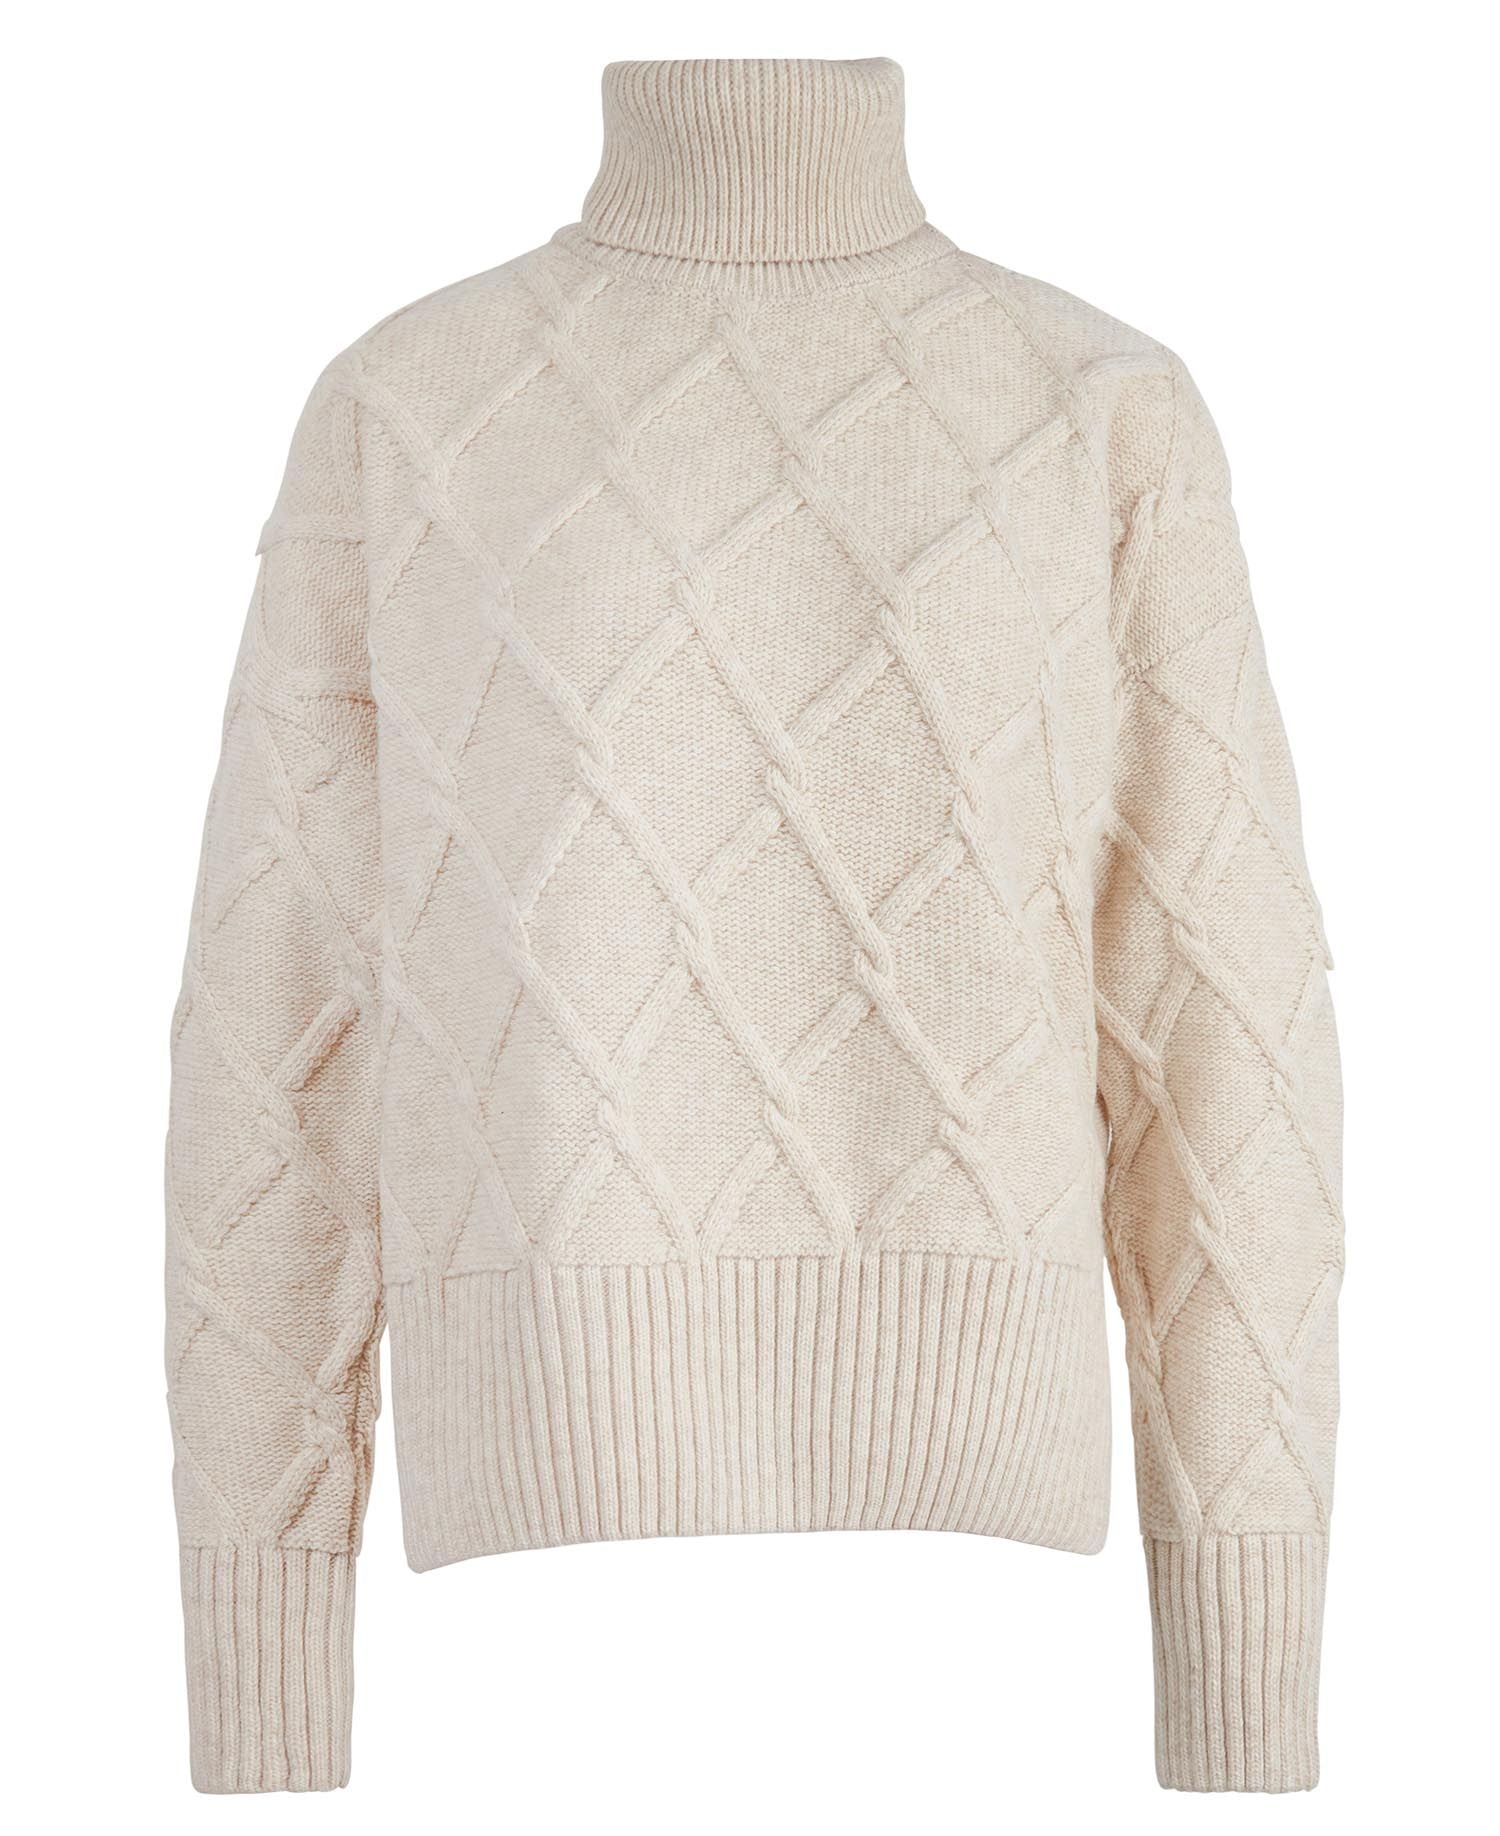 Barbour Ladies Perch Knit in Oatmeal